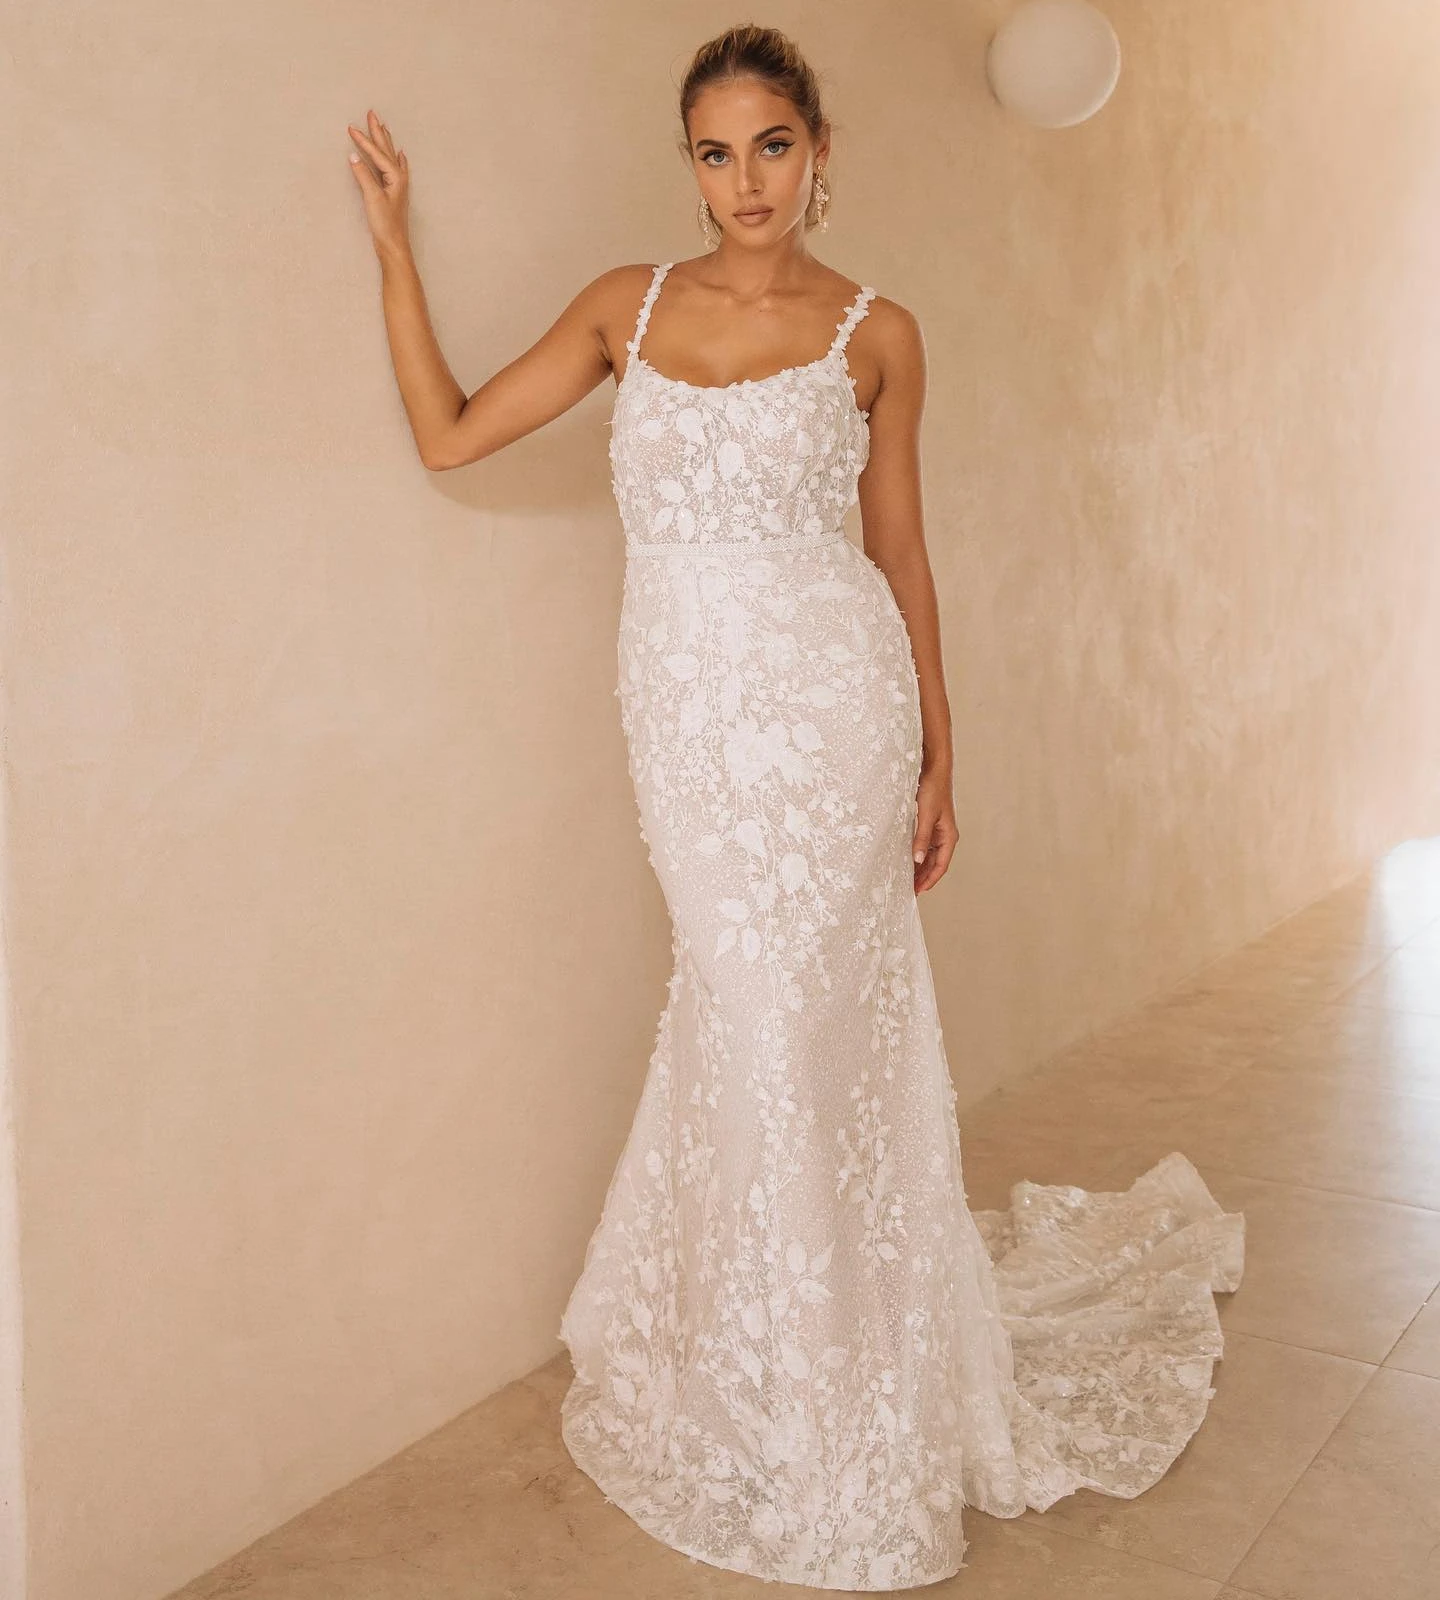 

Charming Mermaid Wedding Dresses Lace Appliqued Bridal Gowns with Long Train Sexy Backless Floor Length Robes de Mariee